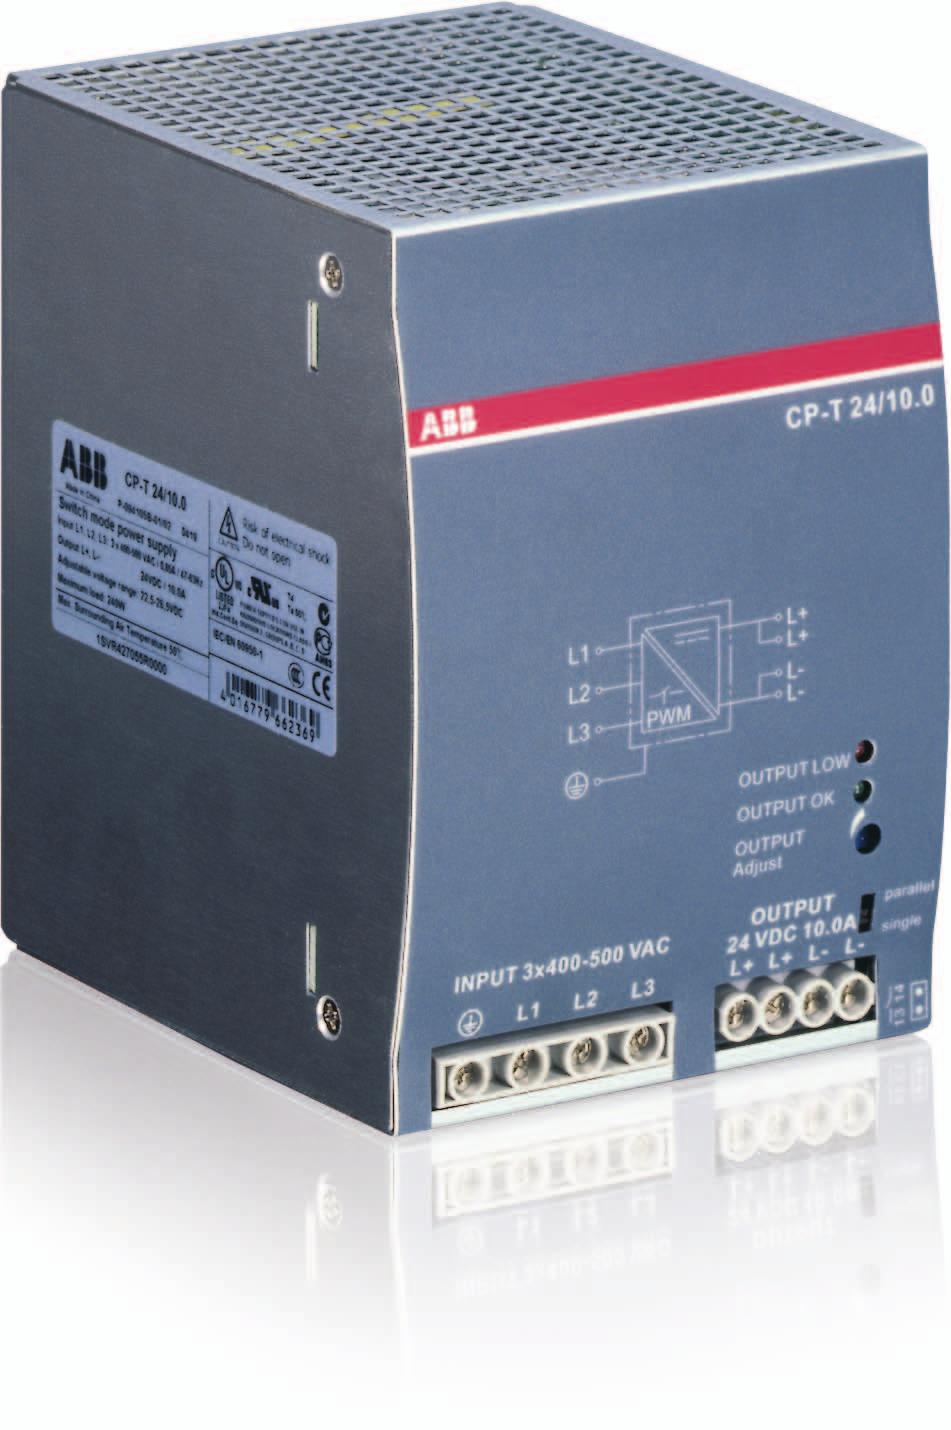 Data sheet Power supply CP-T 24/10.0 Primary switch mode power supply The CP-T range of three-phase power supply units is the youngest member of ABB s power supply family.